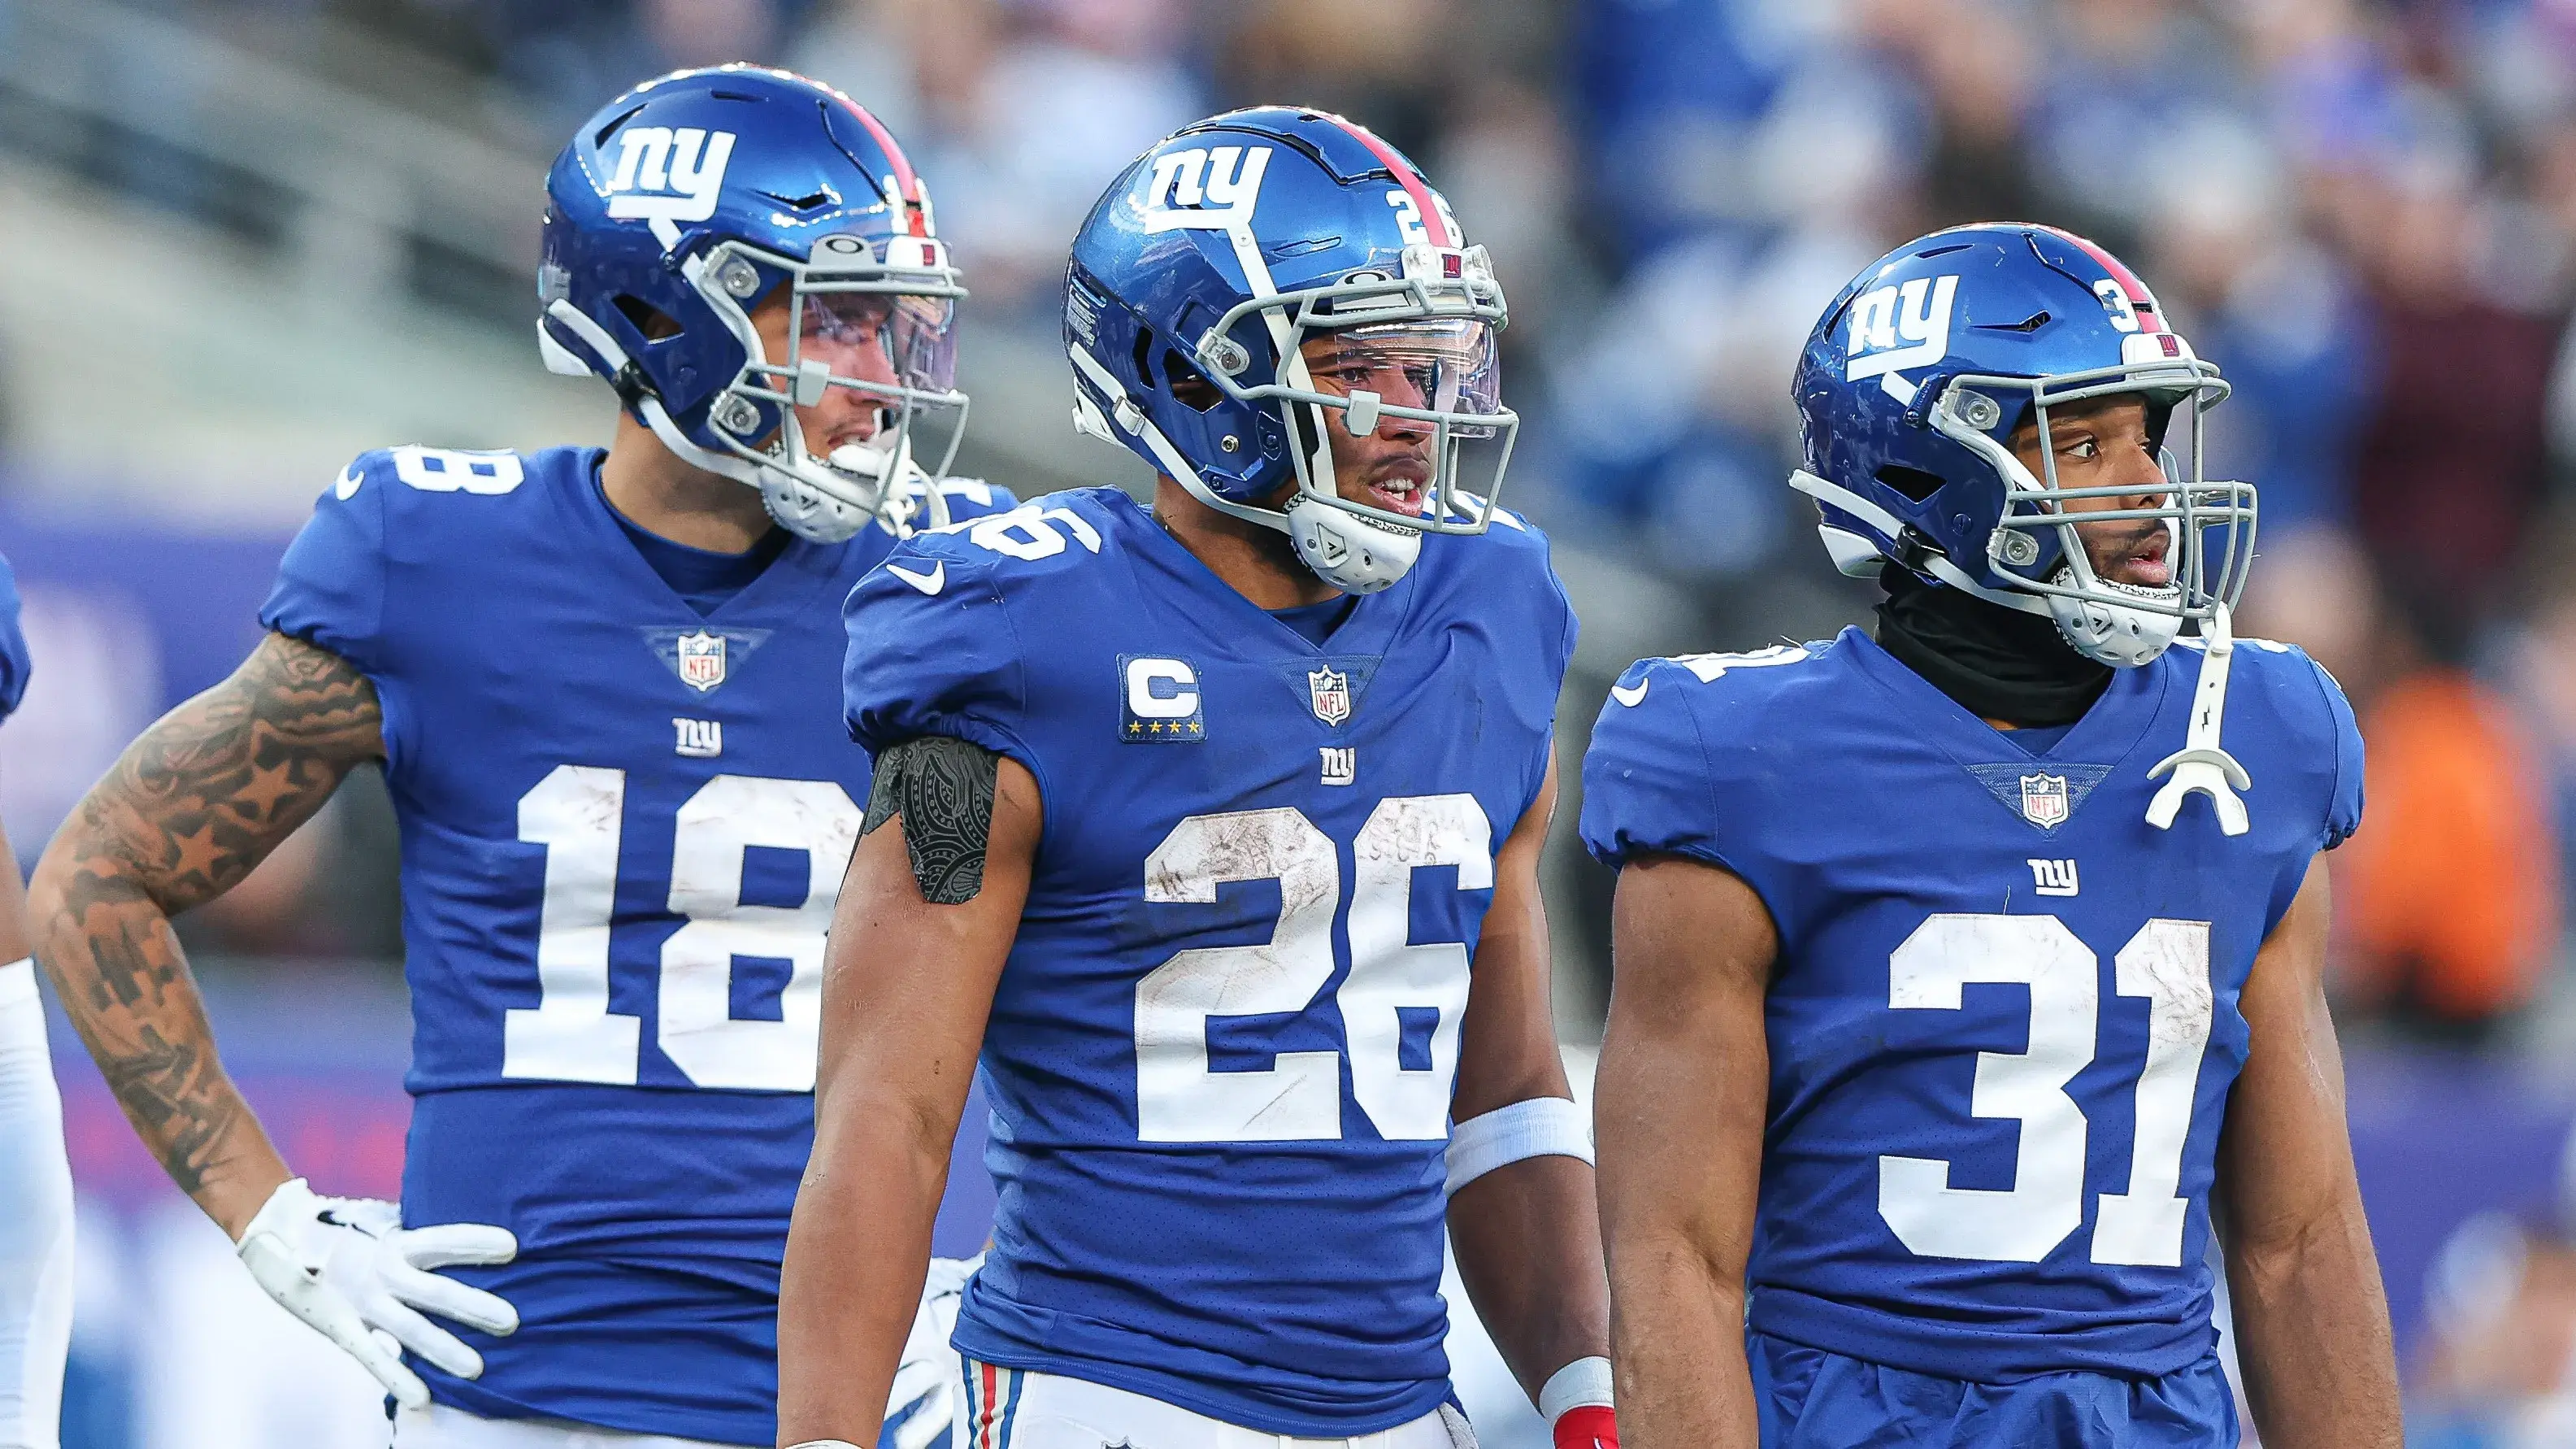 Jan 1, 2023; East Rutherford, New Jersey, USA; New York Giants running back Saquon Barkley (26) looks back with running back Matt Breida (31) and wide receiver Isaiah Hodgins (18) during the second half against the Indianapolis Colts at MetLife Stadium. Mandatory Credit: Vincent Carchietta-USA TODAY Sports / © Vincent Carchietta-USA TODAY Sports